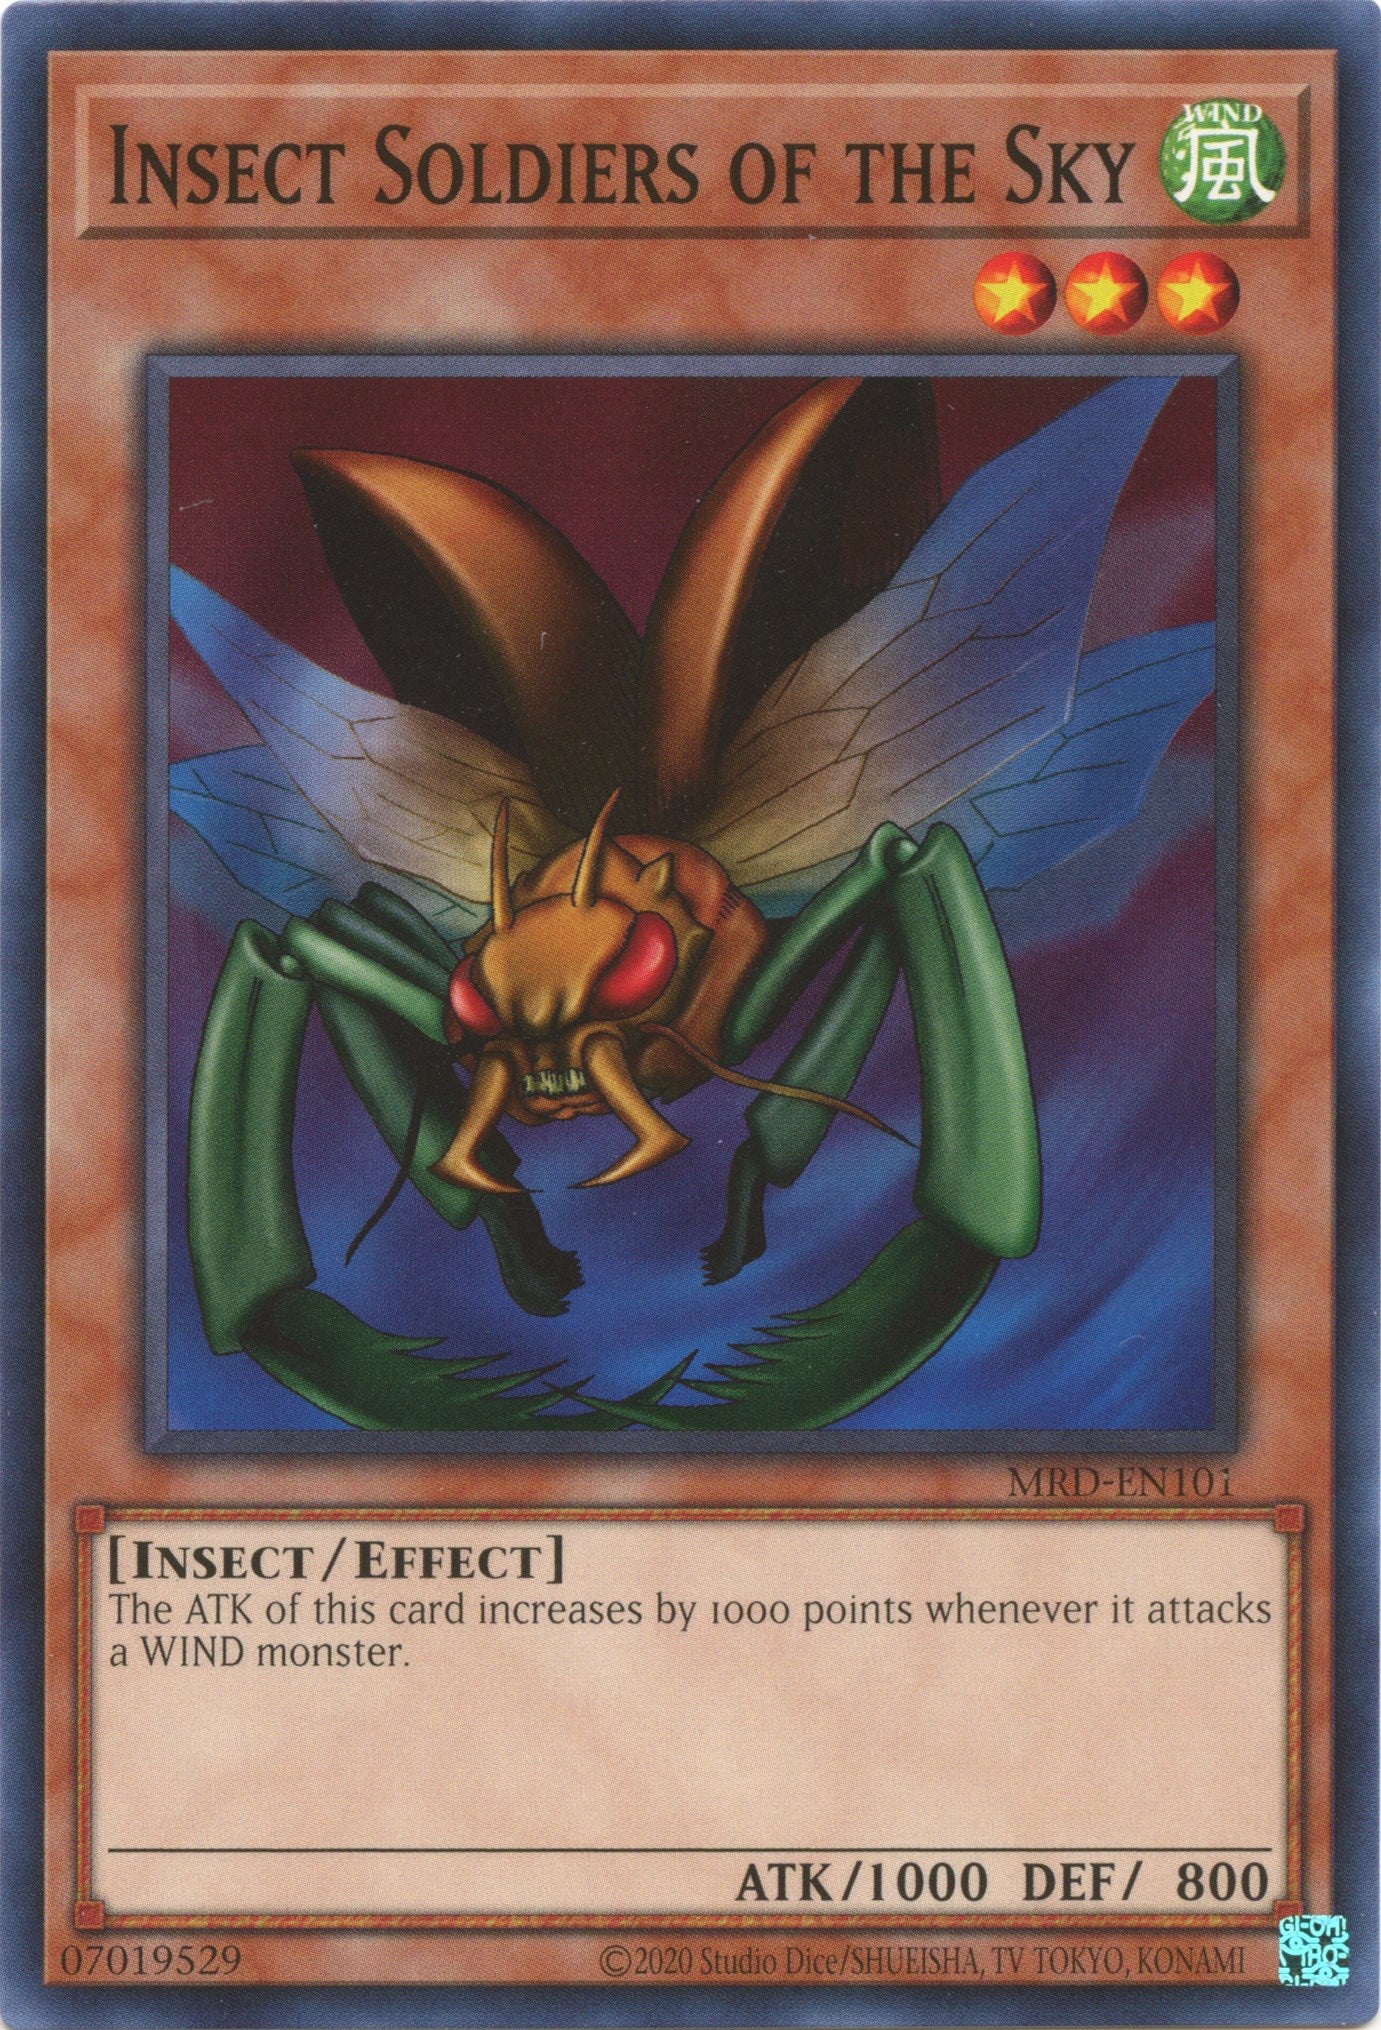 Insect Soldiers of the Sky (25th Anniversary) [MRD-EN101] Common | Amazing Games TCG